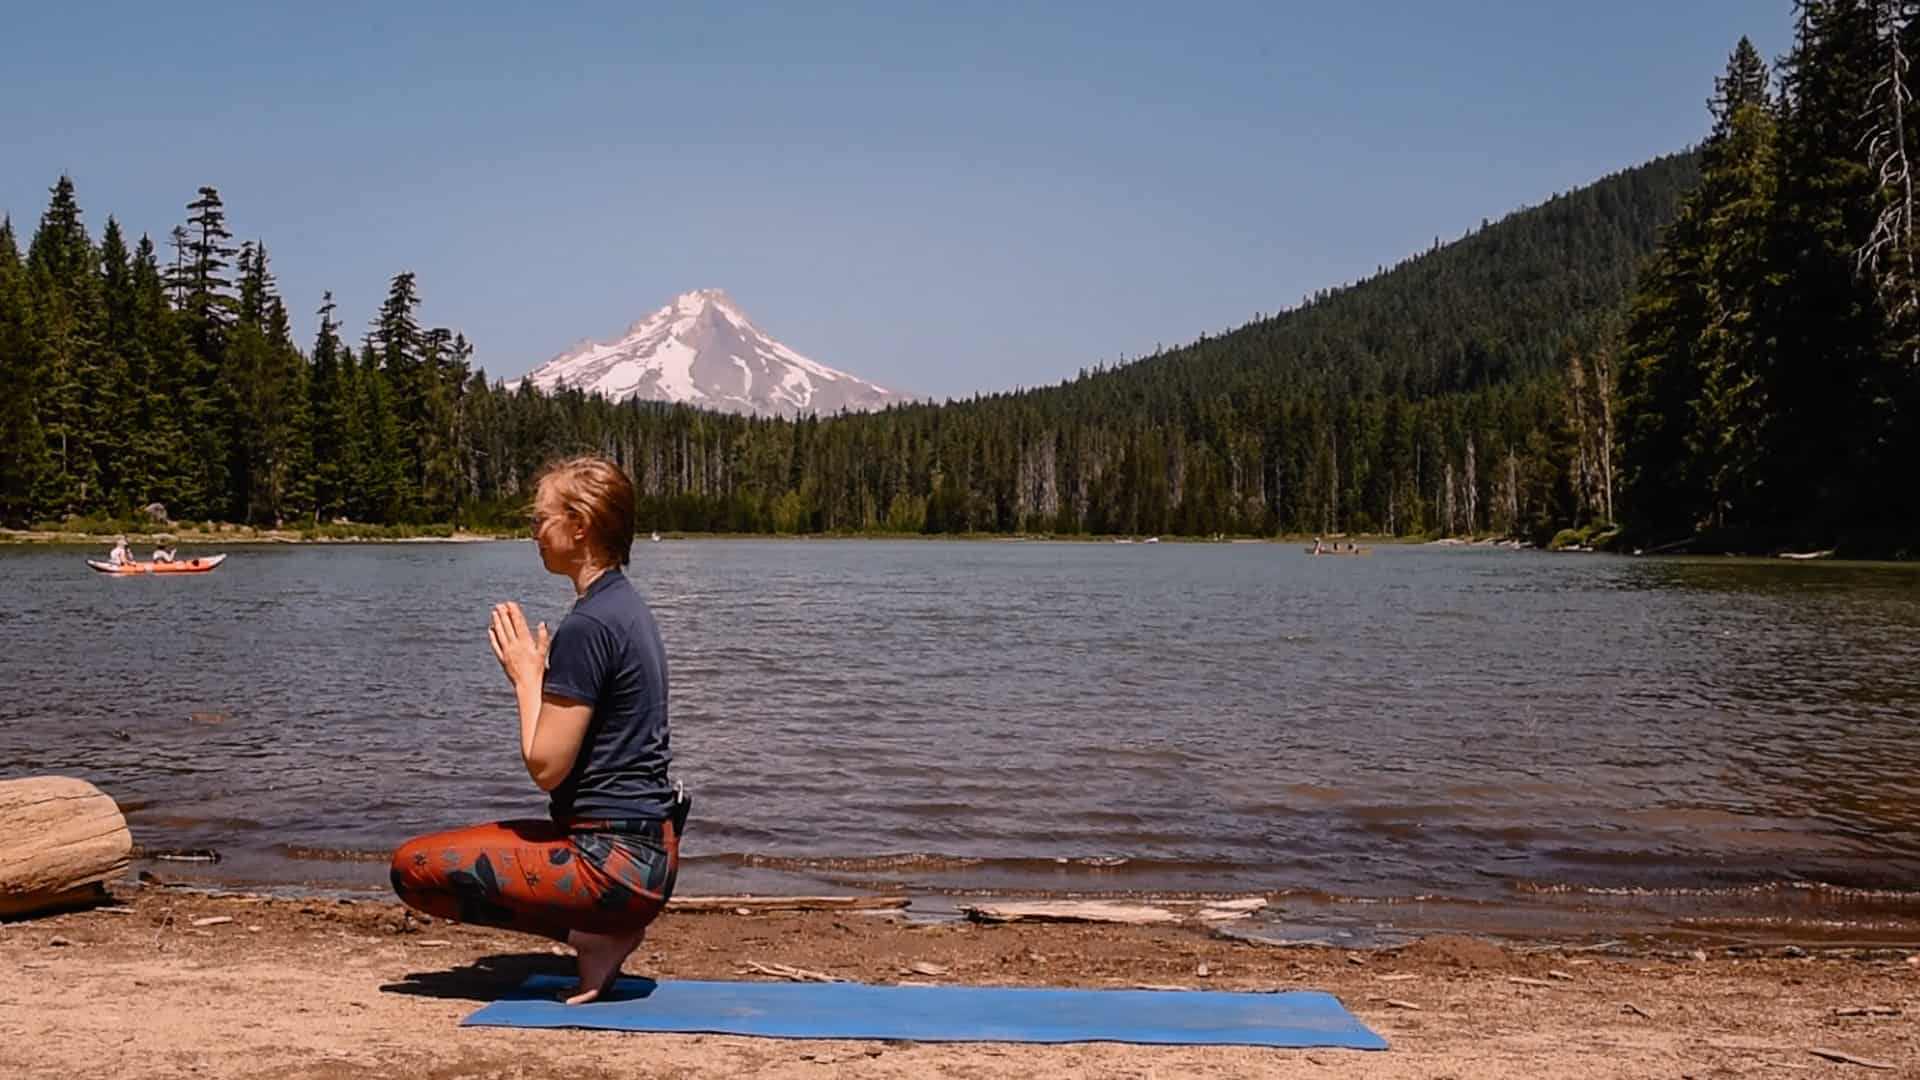 Emmy doing toe stand near an alpine lake for yoga to feel your best